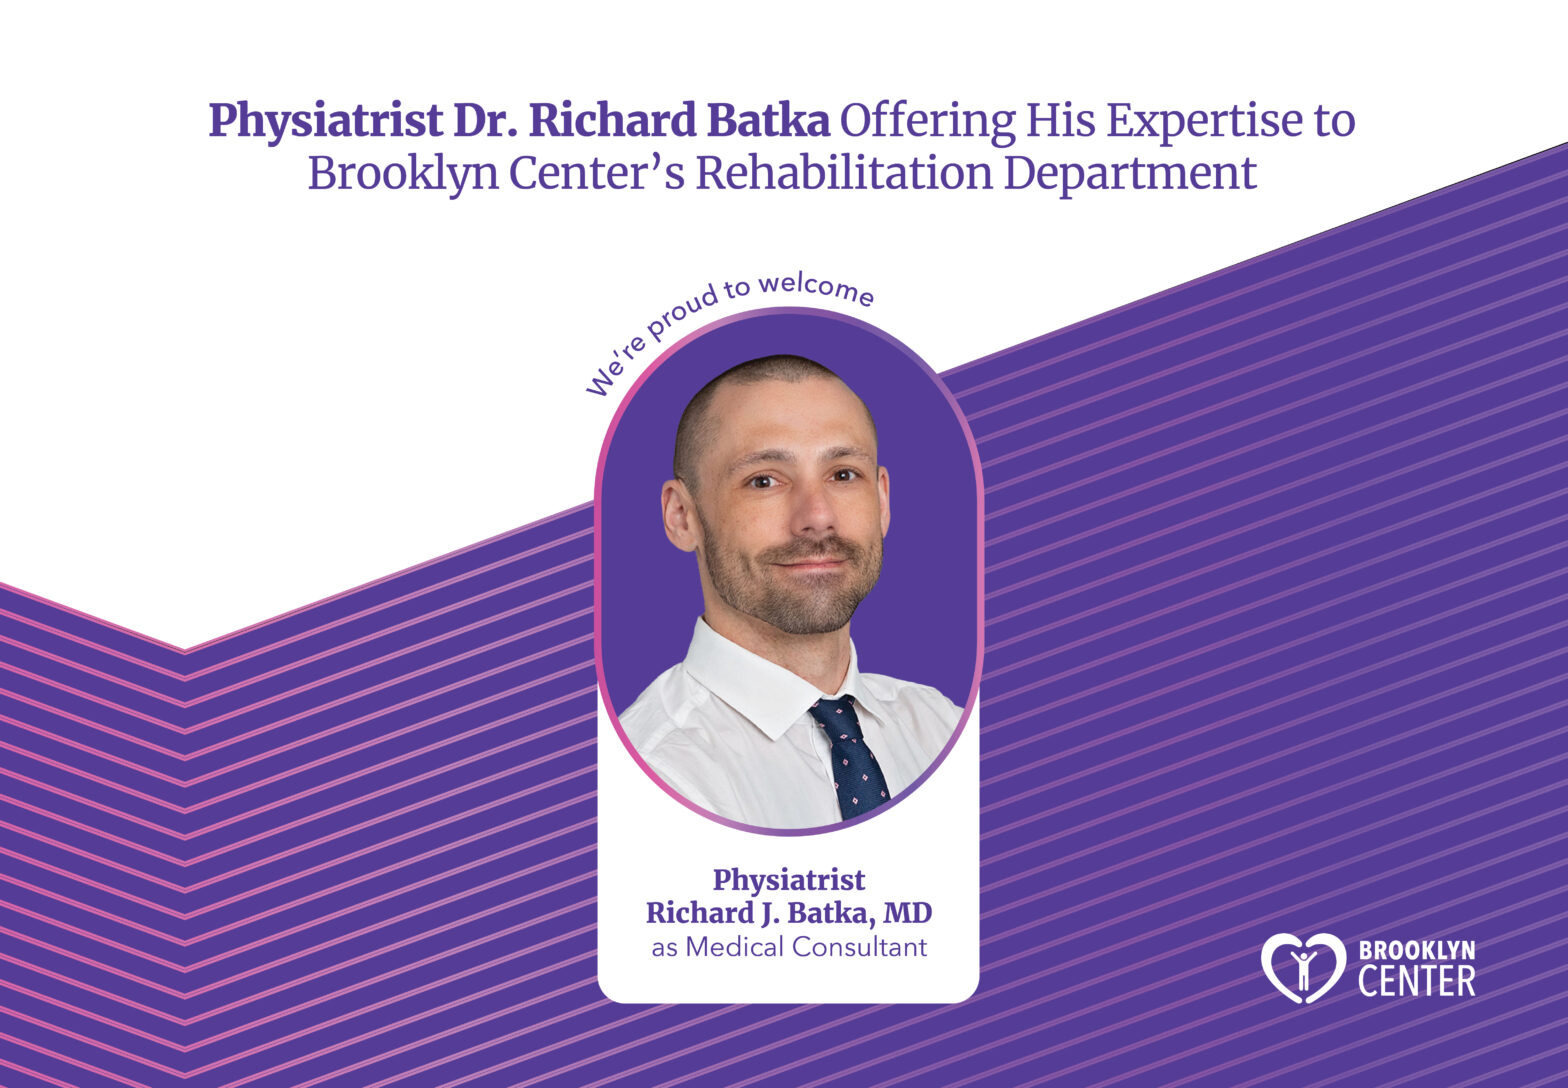 Brooklyn Center is proud to welcome Physiatrist Richard J. Batka, MD as Medical Consultant